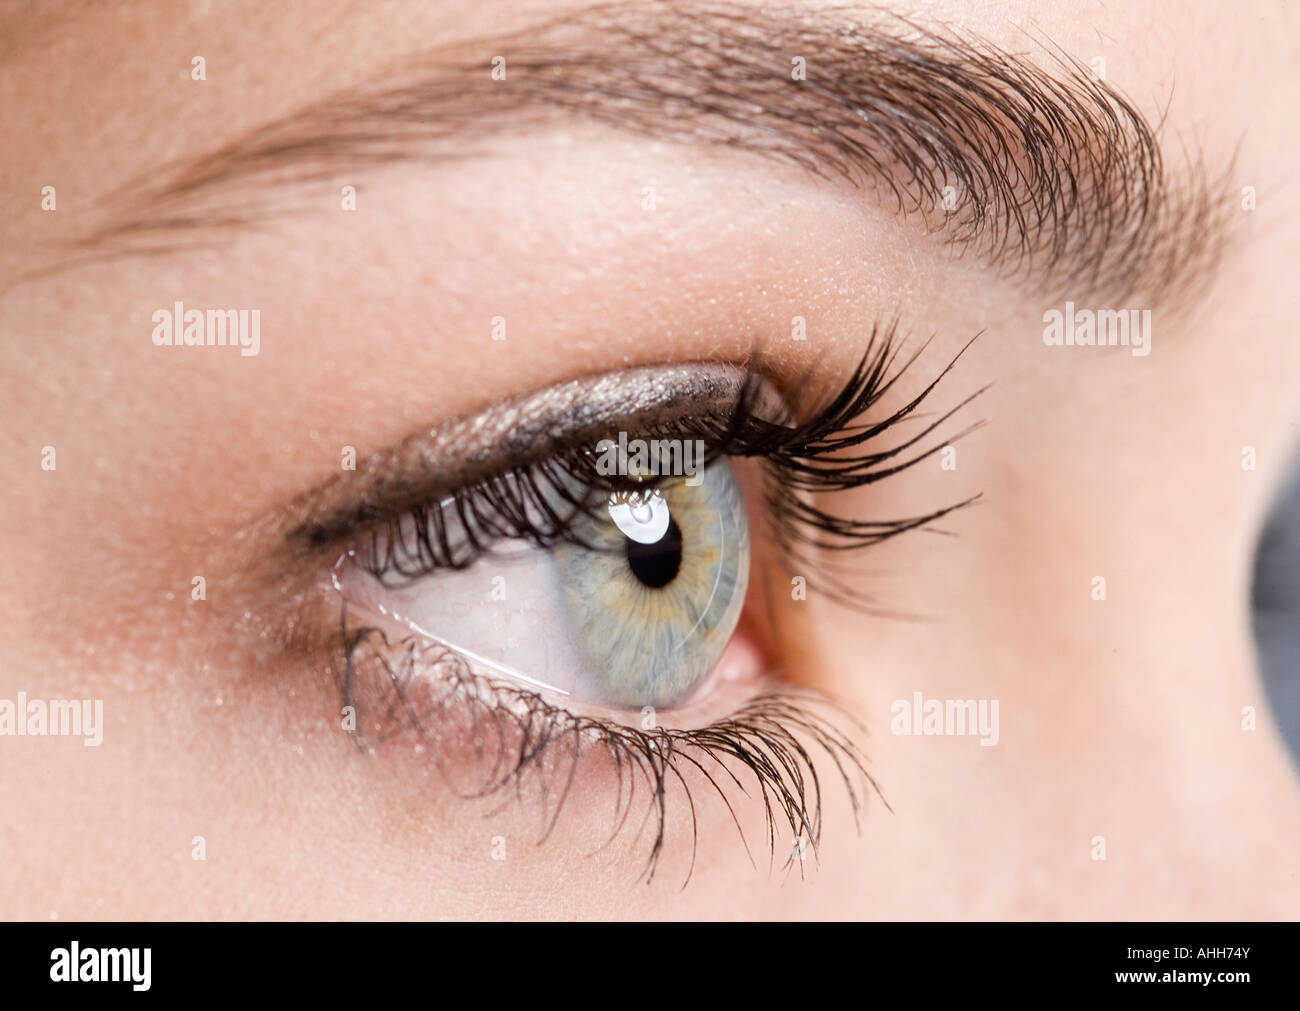 Close-Up of a young womans' eye Stock Photo